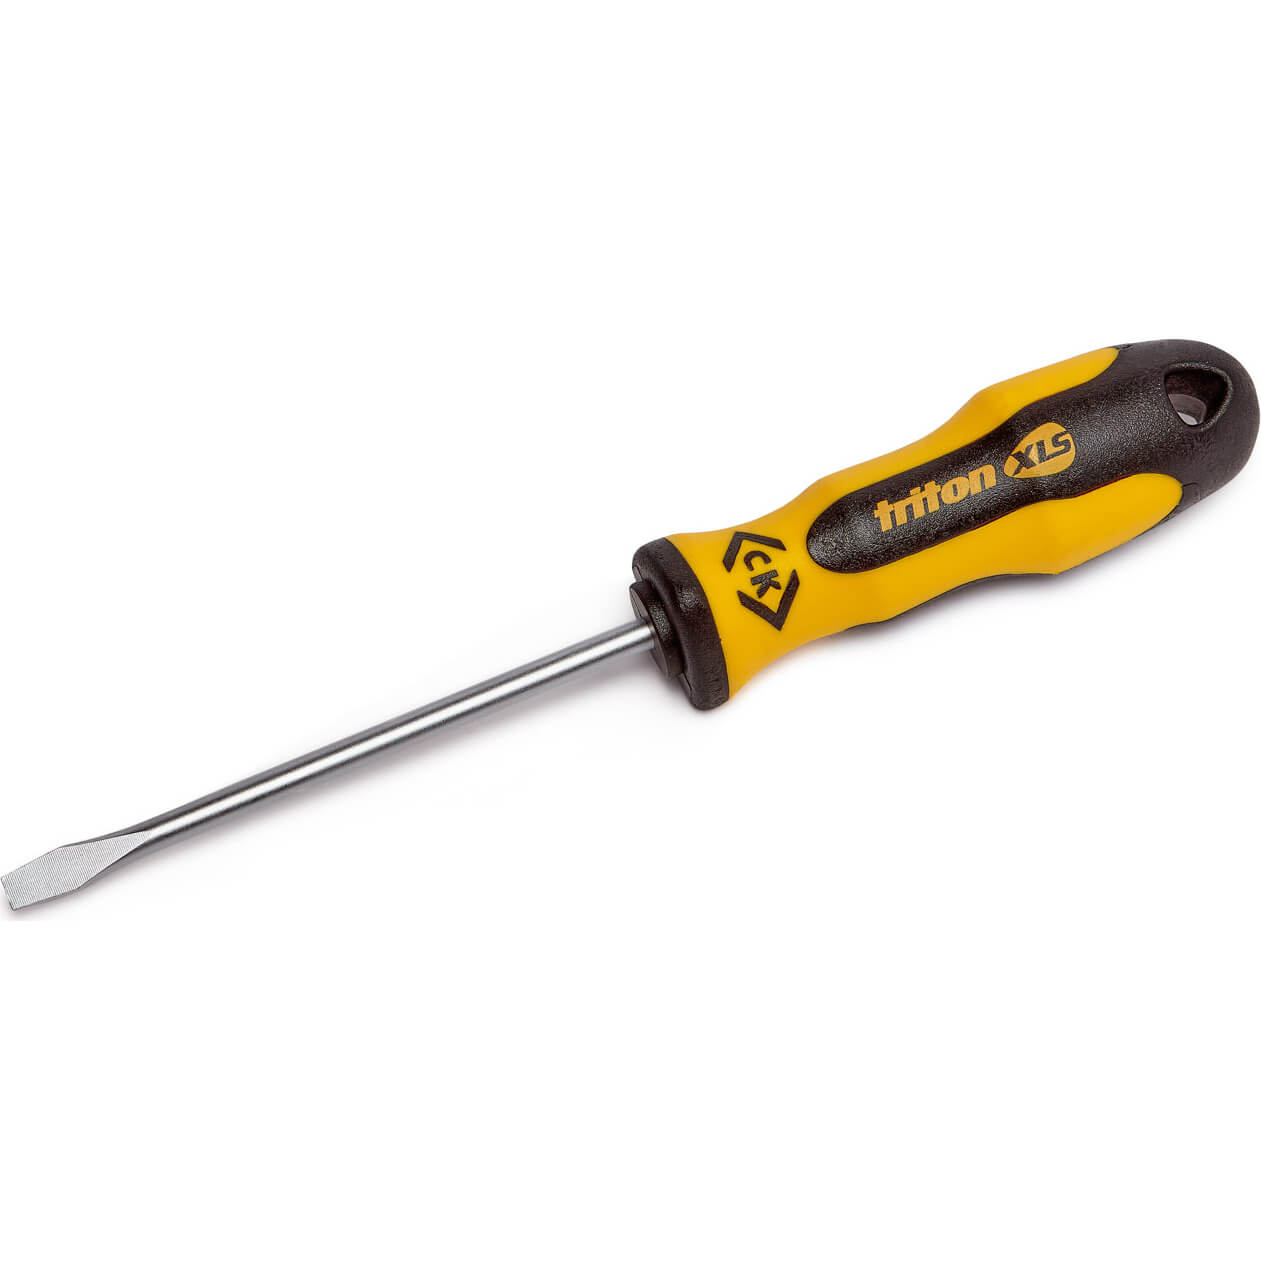 Image of CK Triton XLS Flared Slotted Screwdriver 5.5mm 100mm